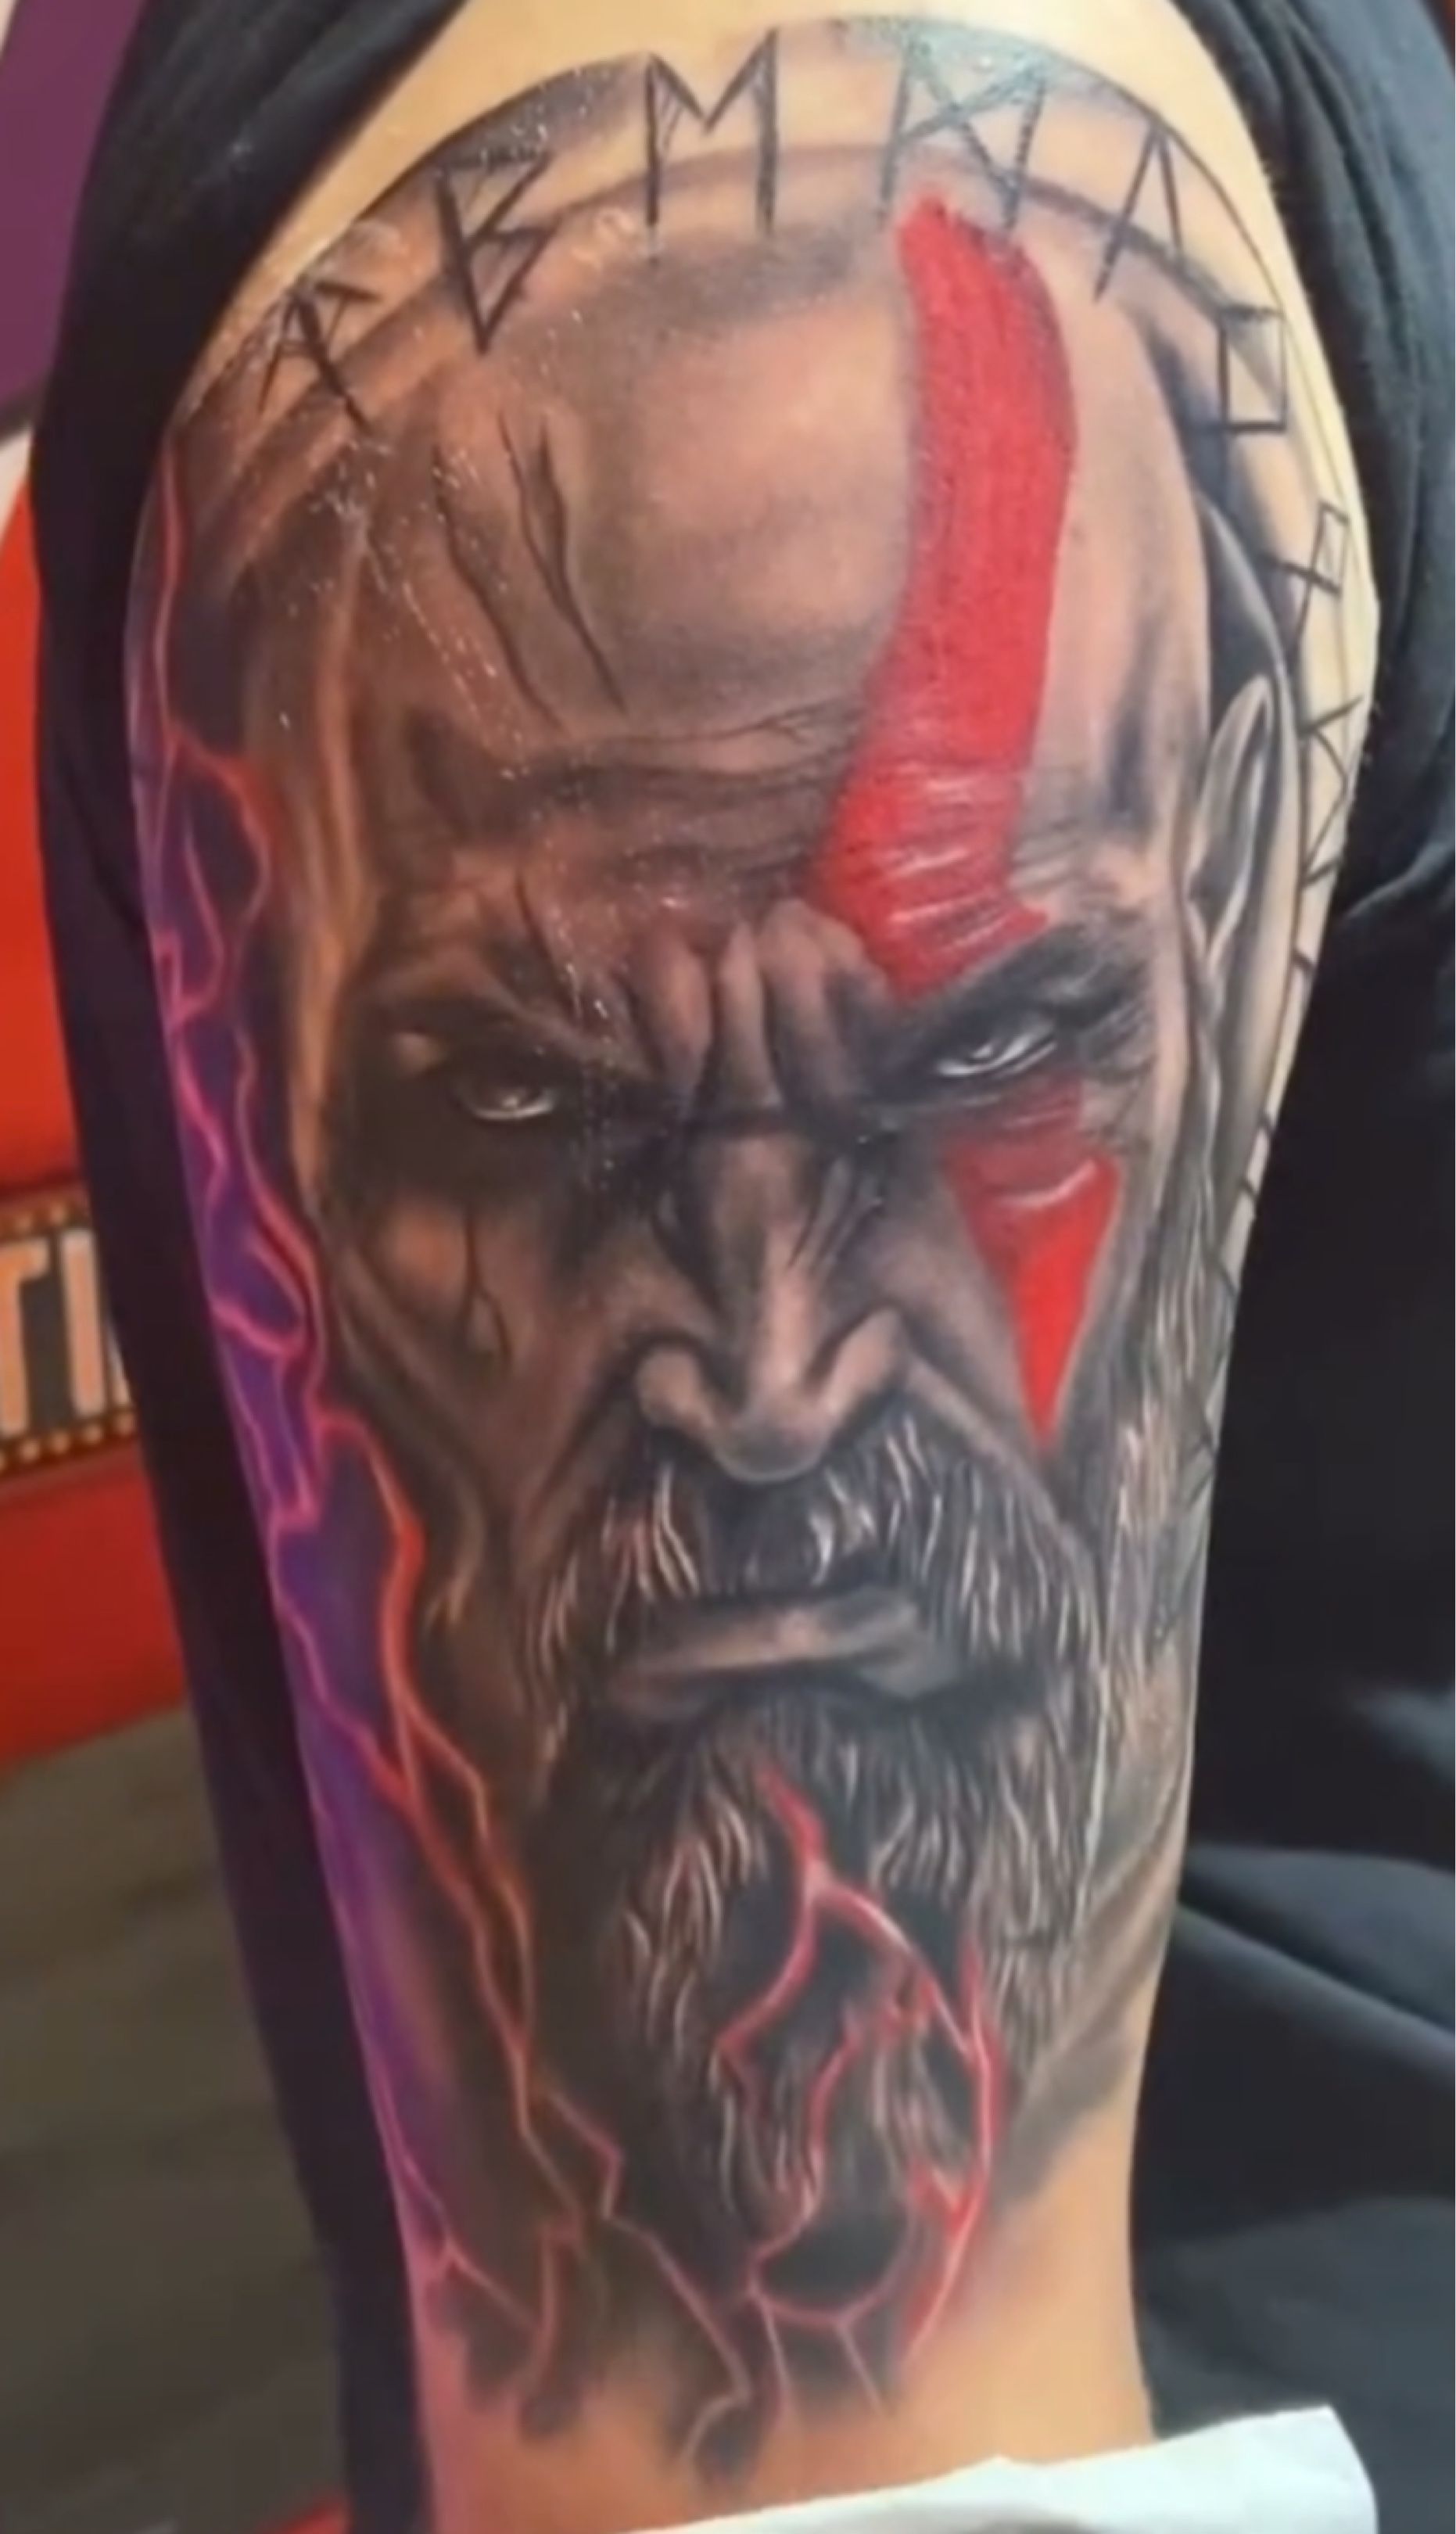 oblong-whale542: tattoo style, clouse of face and nouse, fine lines and  shading kratos from the game god of war